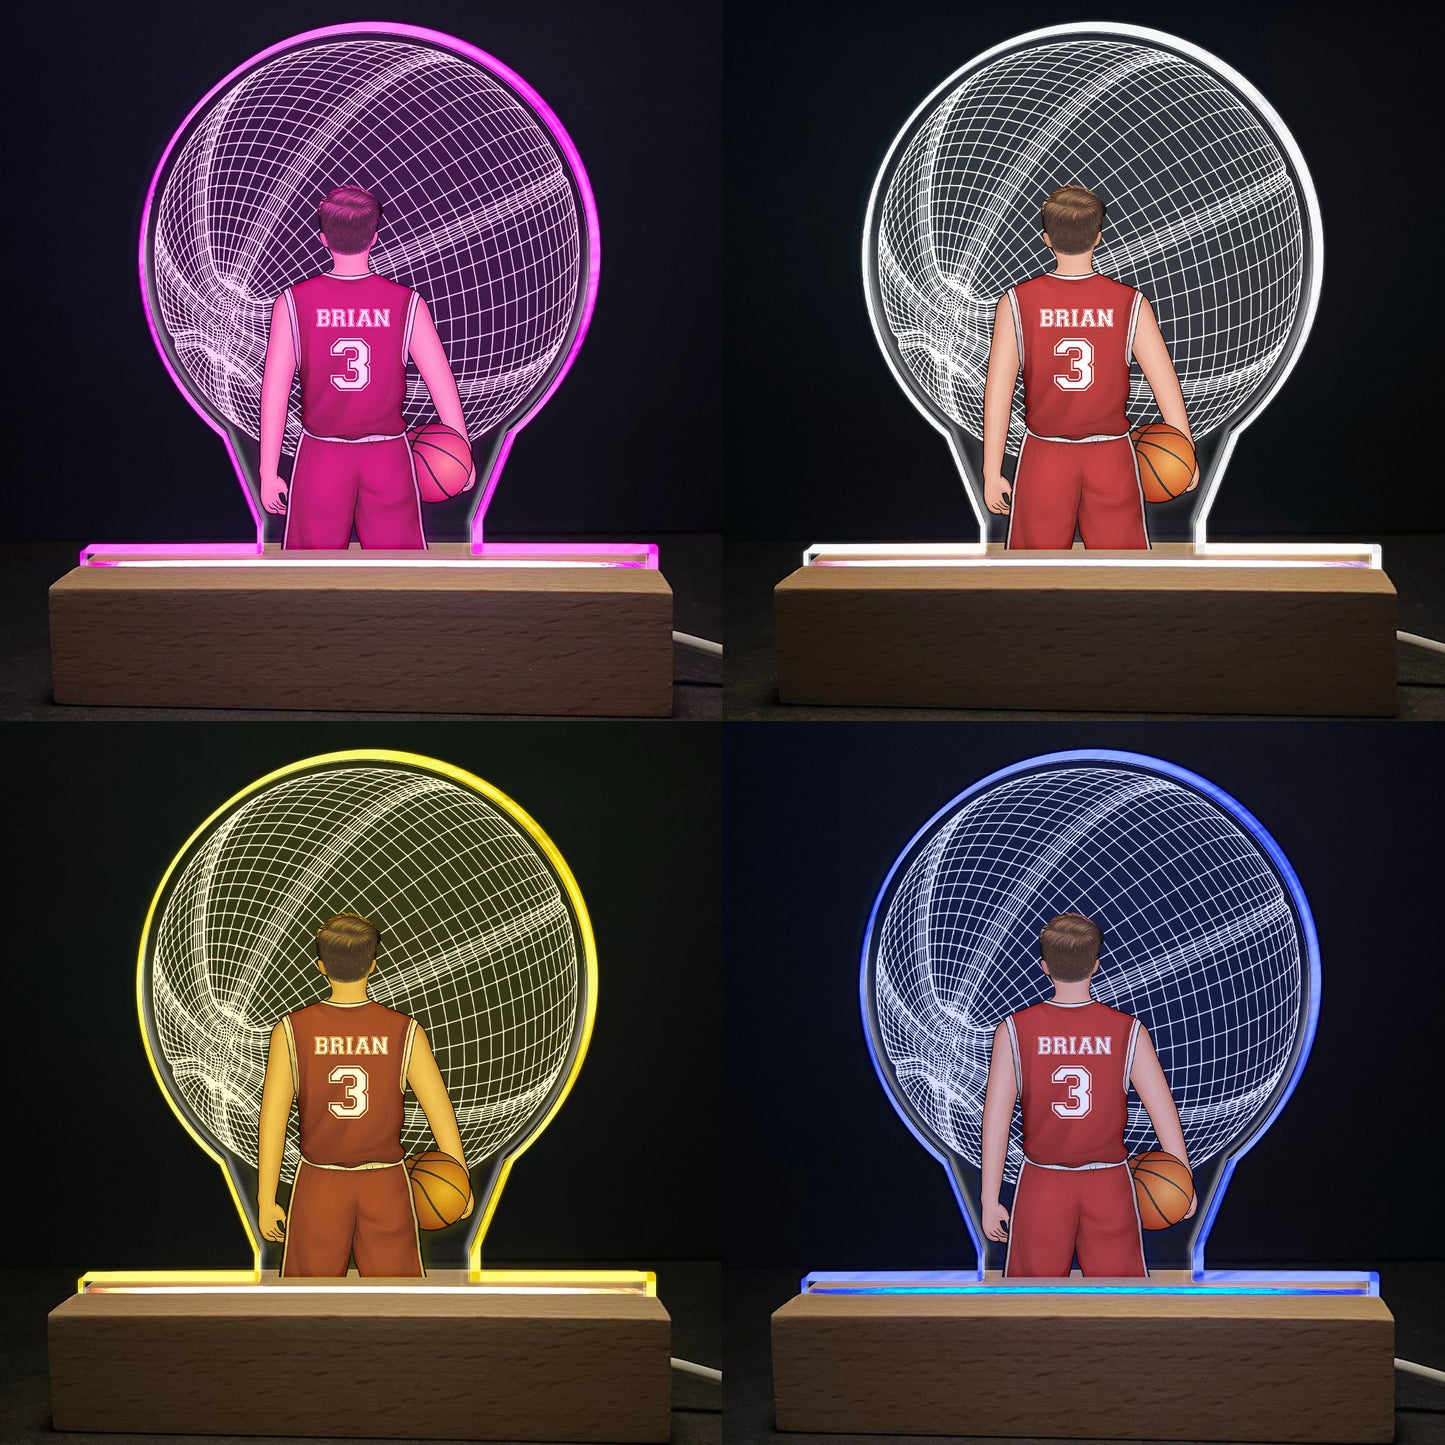 Basketball Player - Personalized LED Light